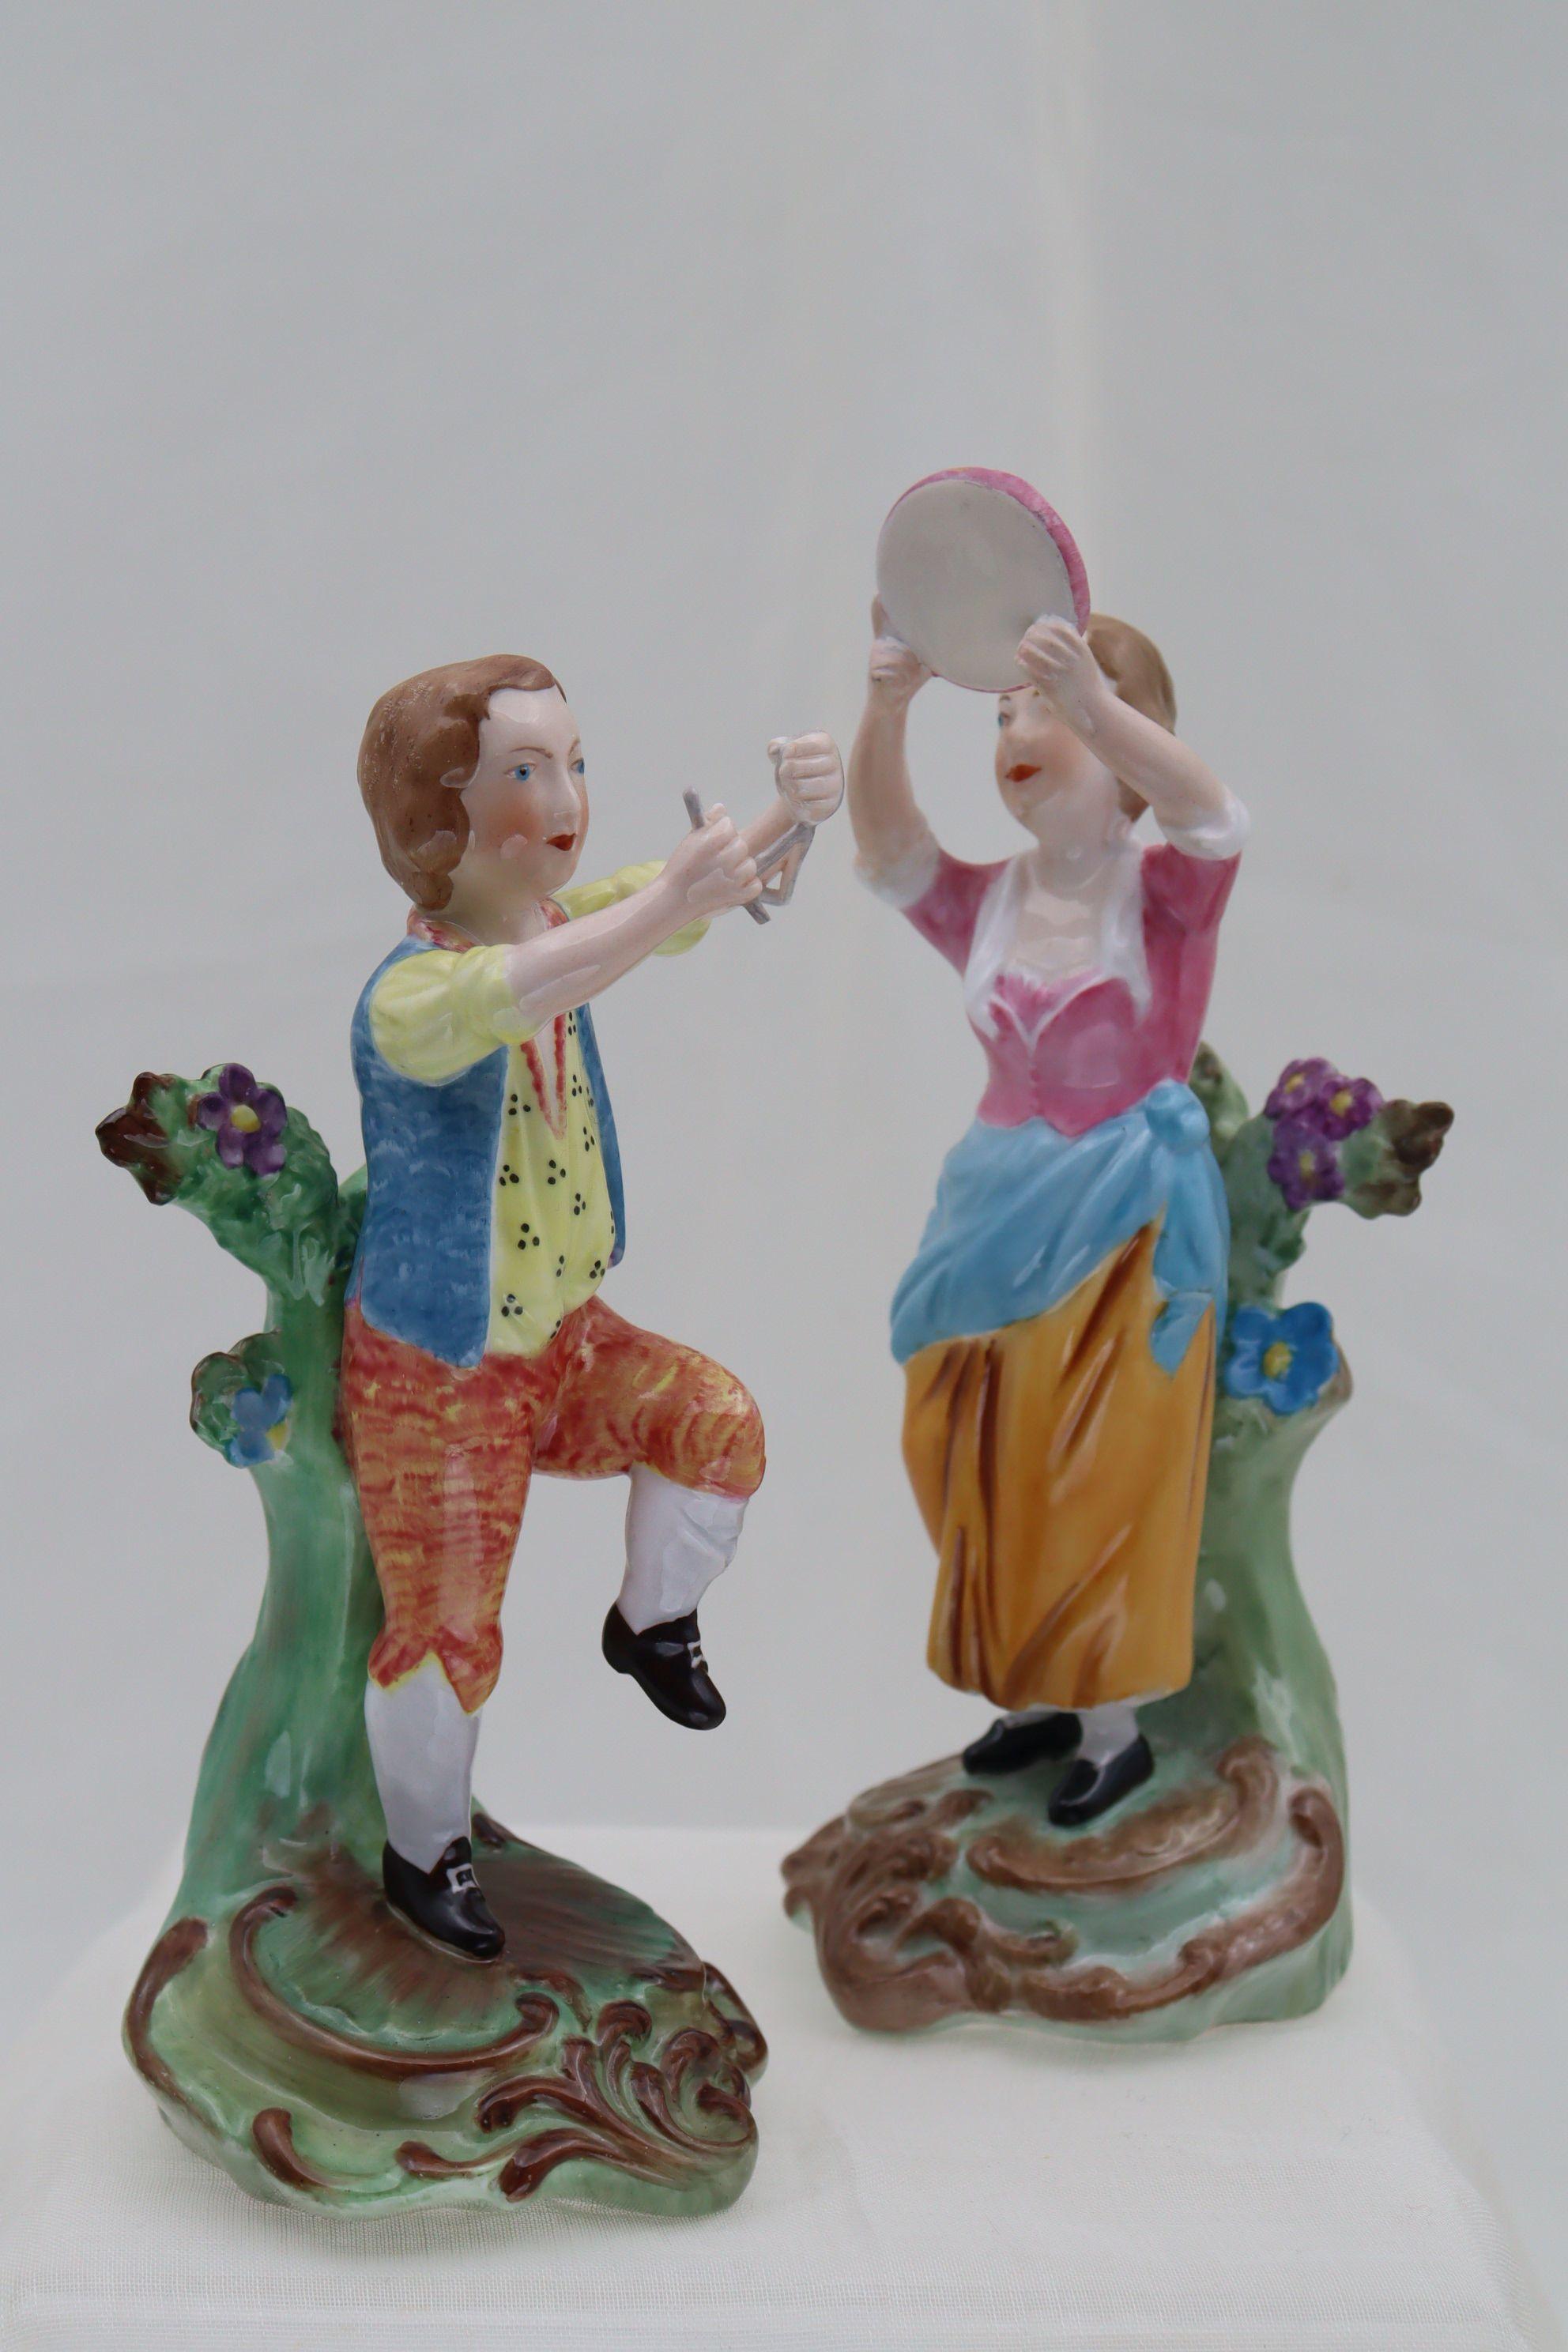 These two porcelain figures were part of a series issued by Copeland Spode in 1933, to celebrate the bicentenary of Josiah Spode's birth. To create this series, Spode used the original moulds from the Chelsea factory from the late 1700's, which